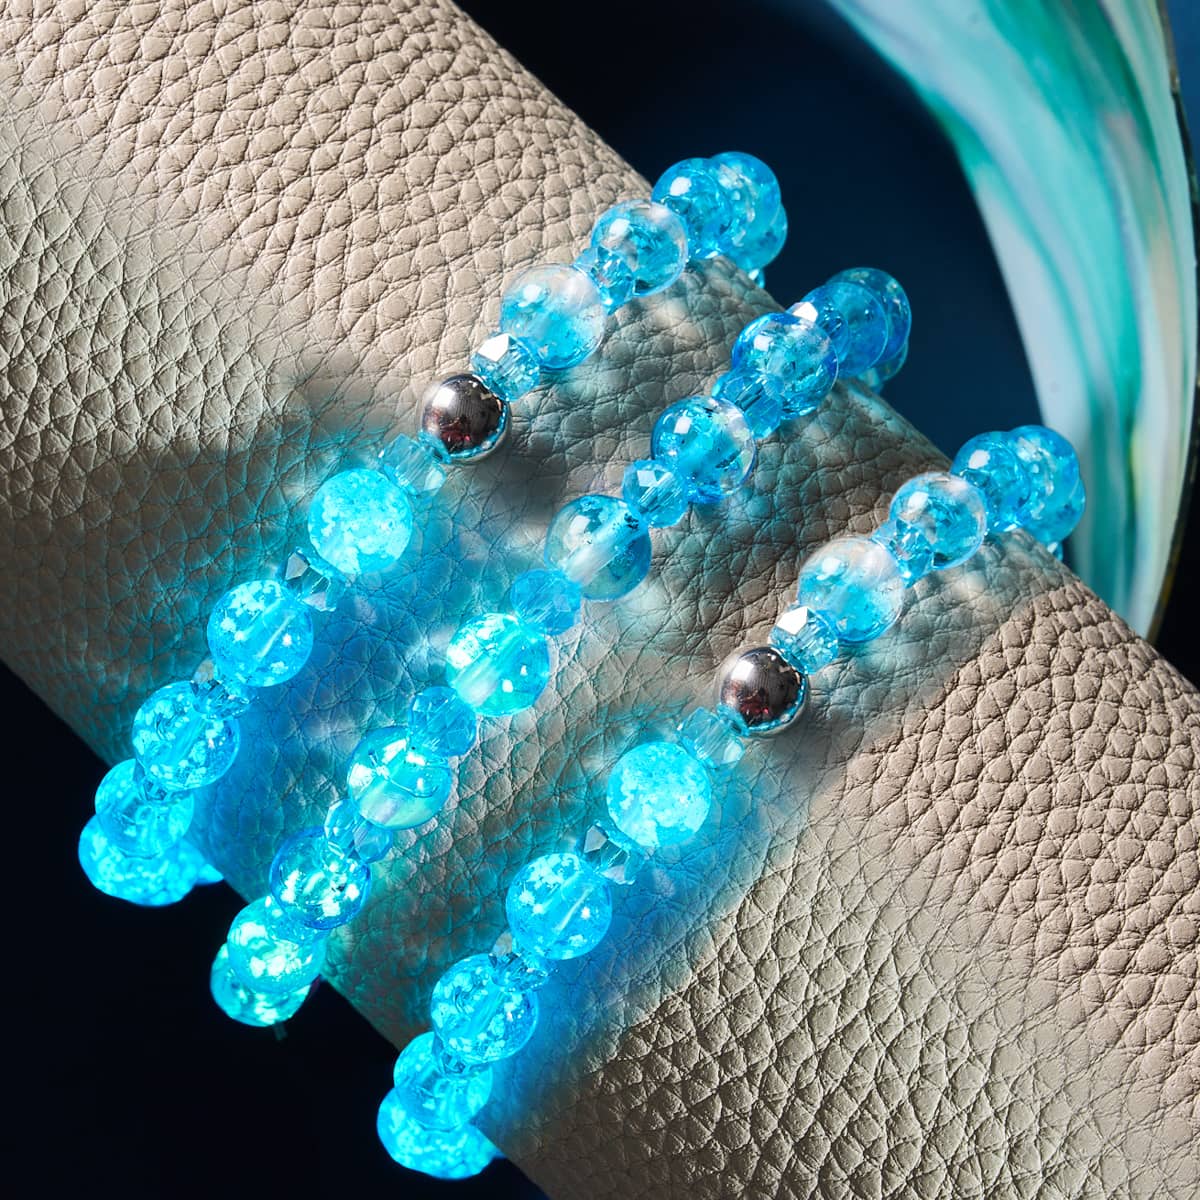 8mm Beautiful Mermaid Beads for Jewelry Making, Ocean Beads for Necklace,  Bracelet, Glass Crackle Beads, Bright Colored Beads for Earrings 